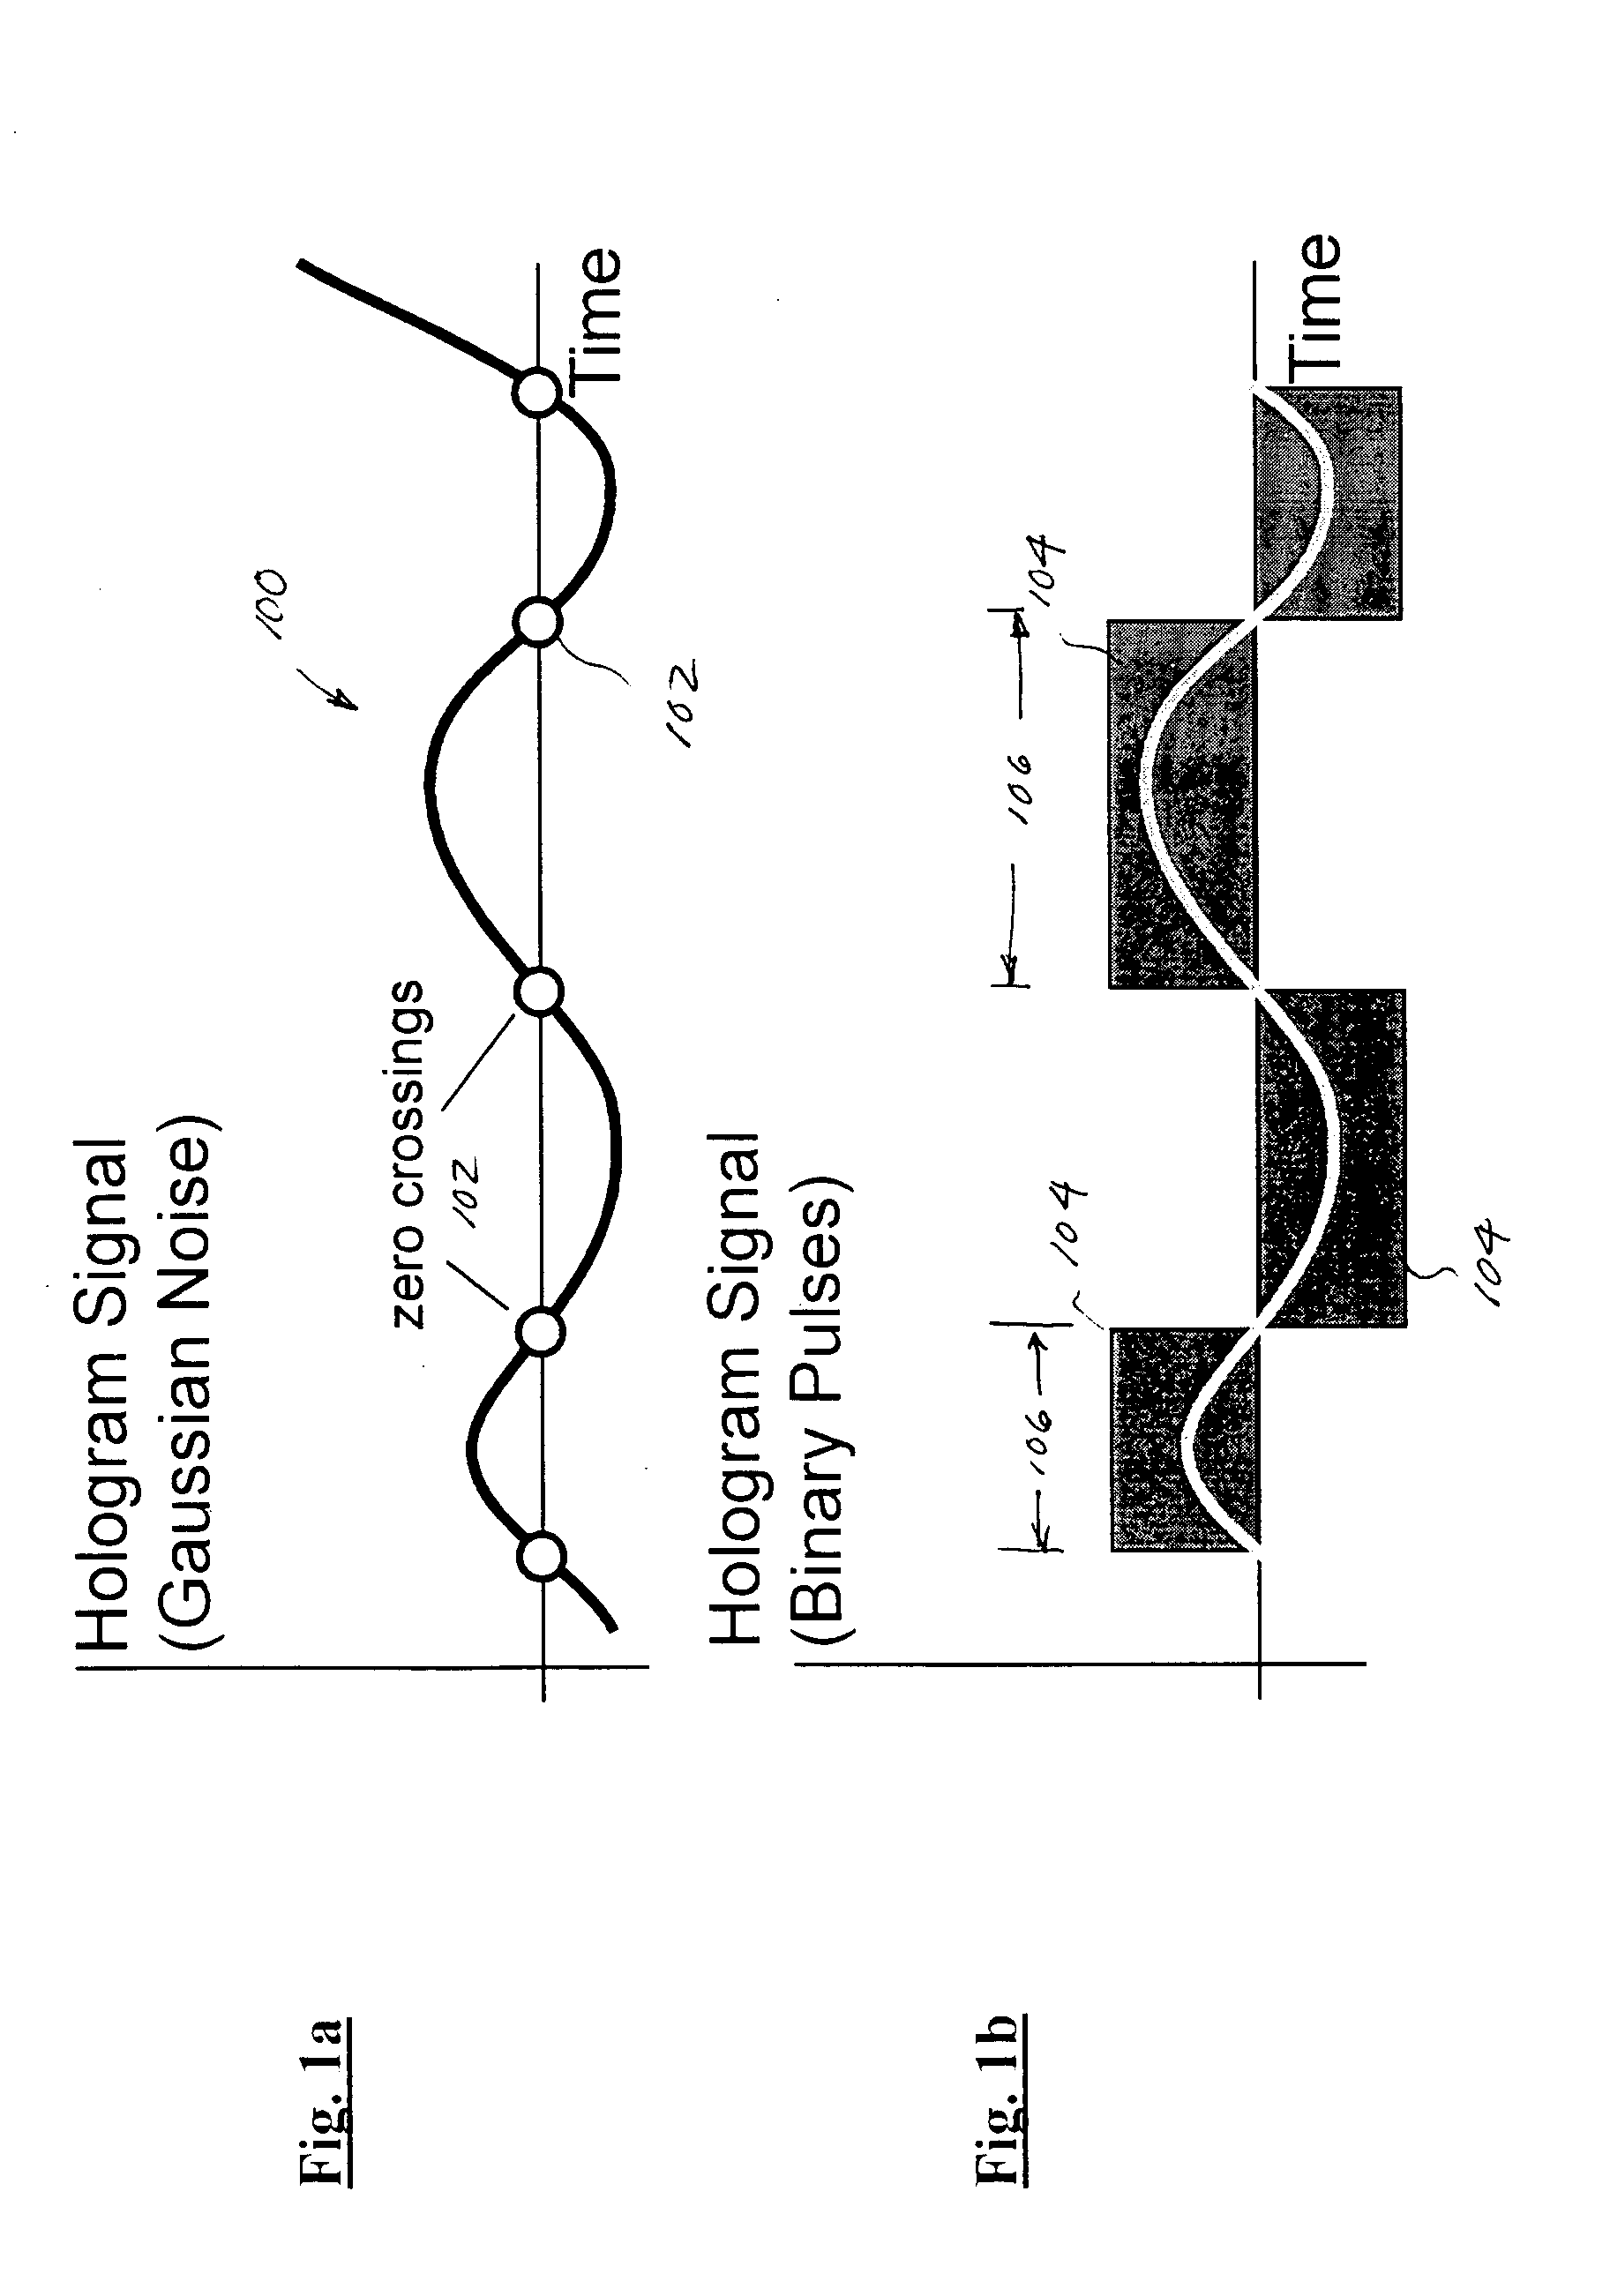 Holographic ranging apparatus and methods